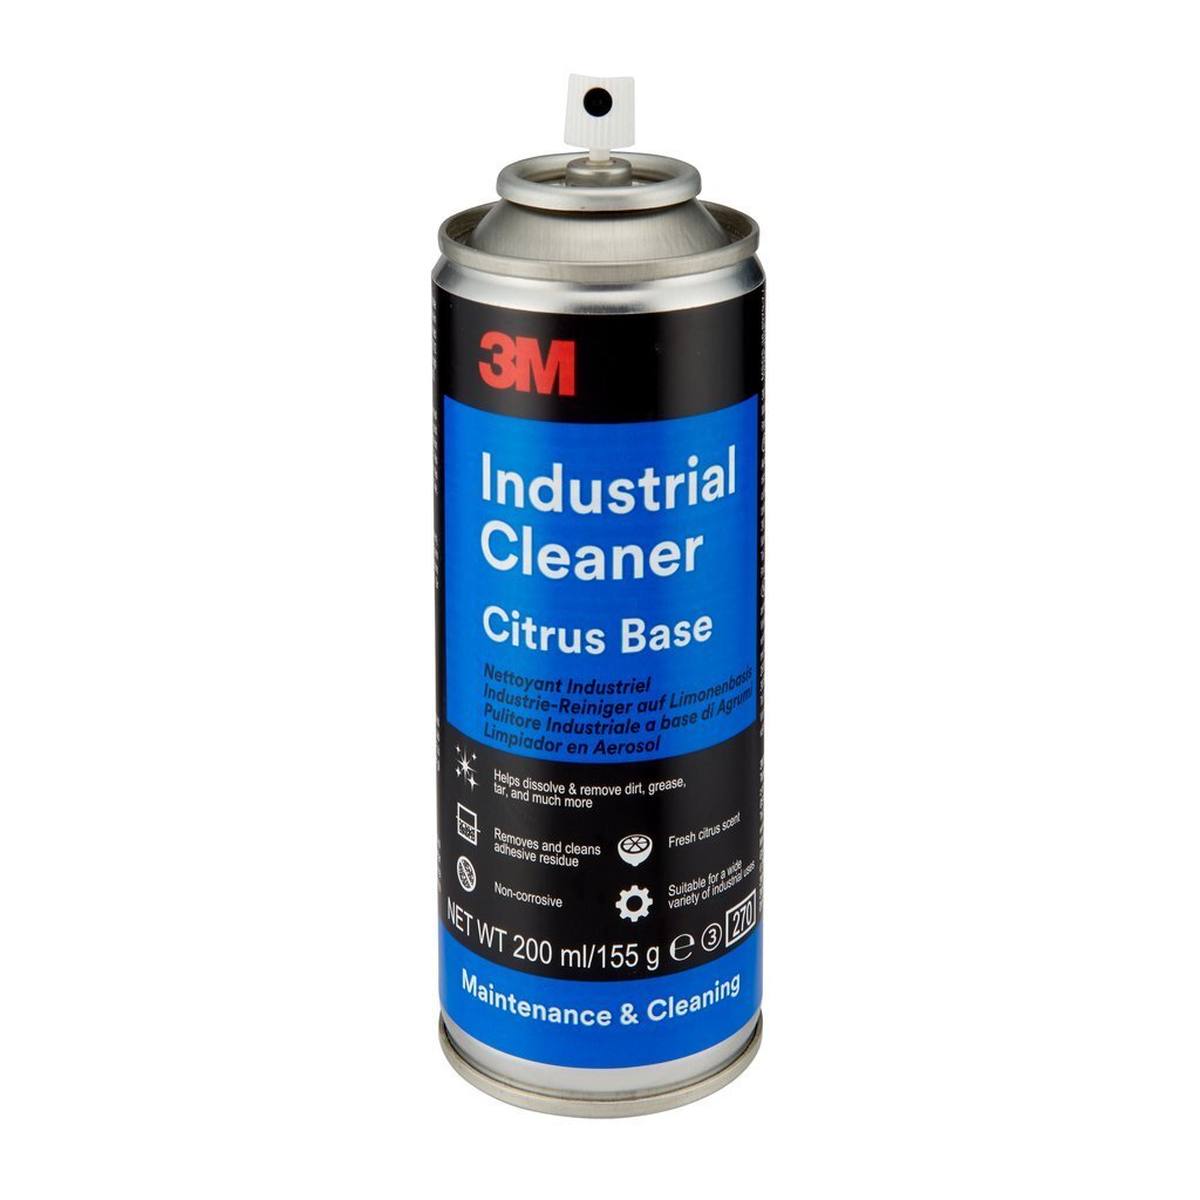 3M Scotch-Weld Lime-based Industrial Cleaner, Clear, 200 ml #IR200